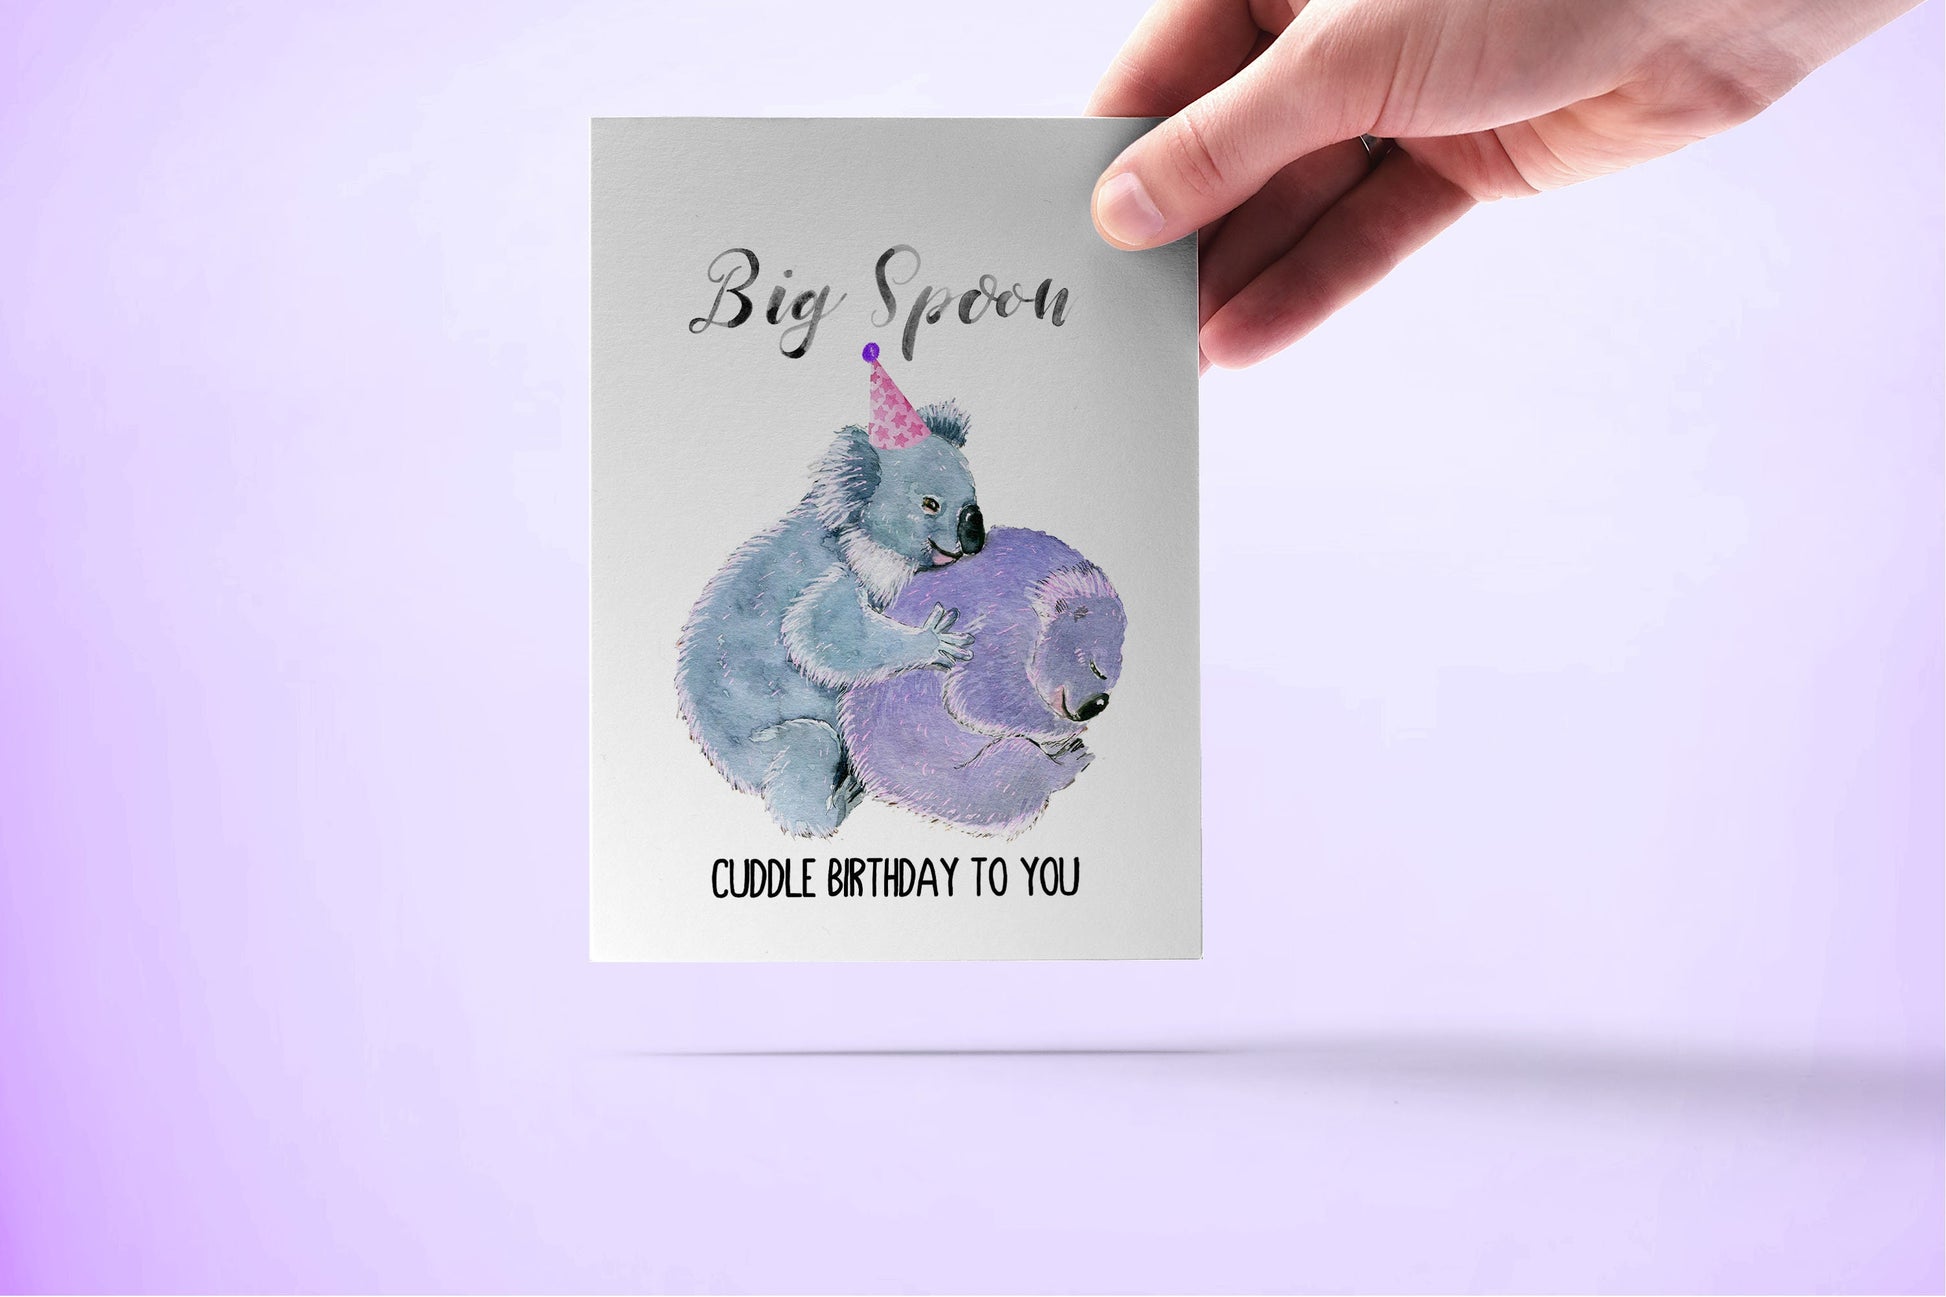 Cuddle Koala Birthday Card For Little Spoon - Cute Birthday Card For Boyfriend - Husband Birthday Gift From Wife